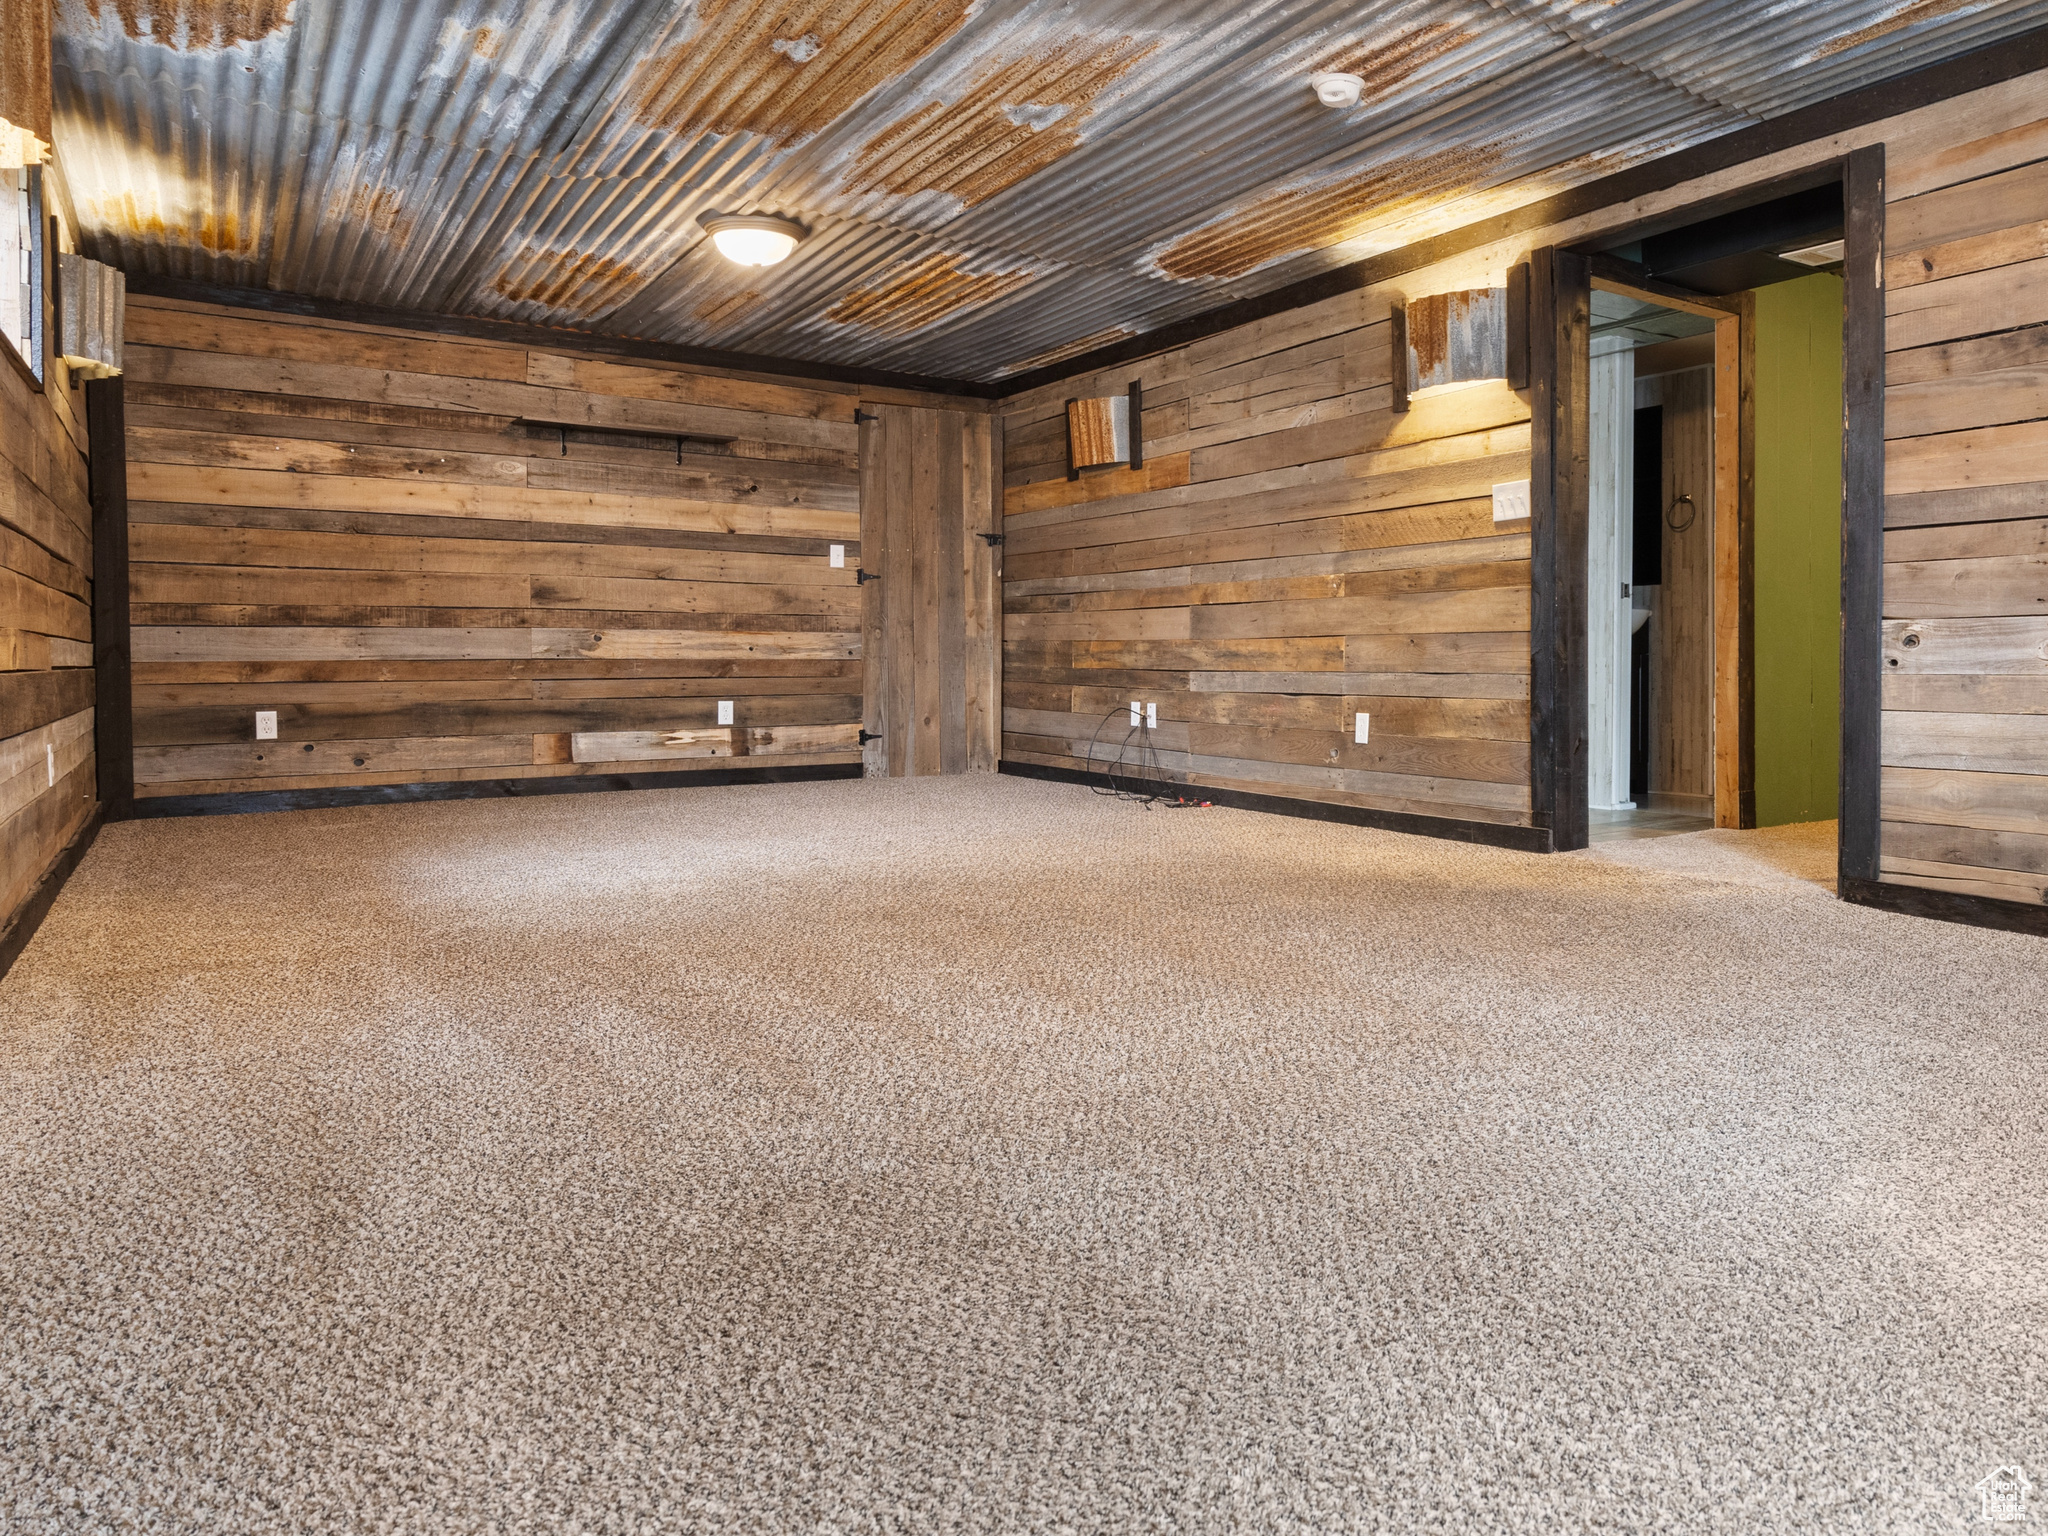 Spare room featuring wood ceiling, wood walls, and carpet flooring